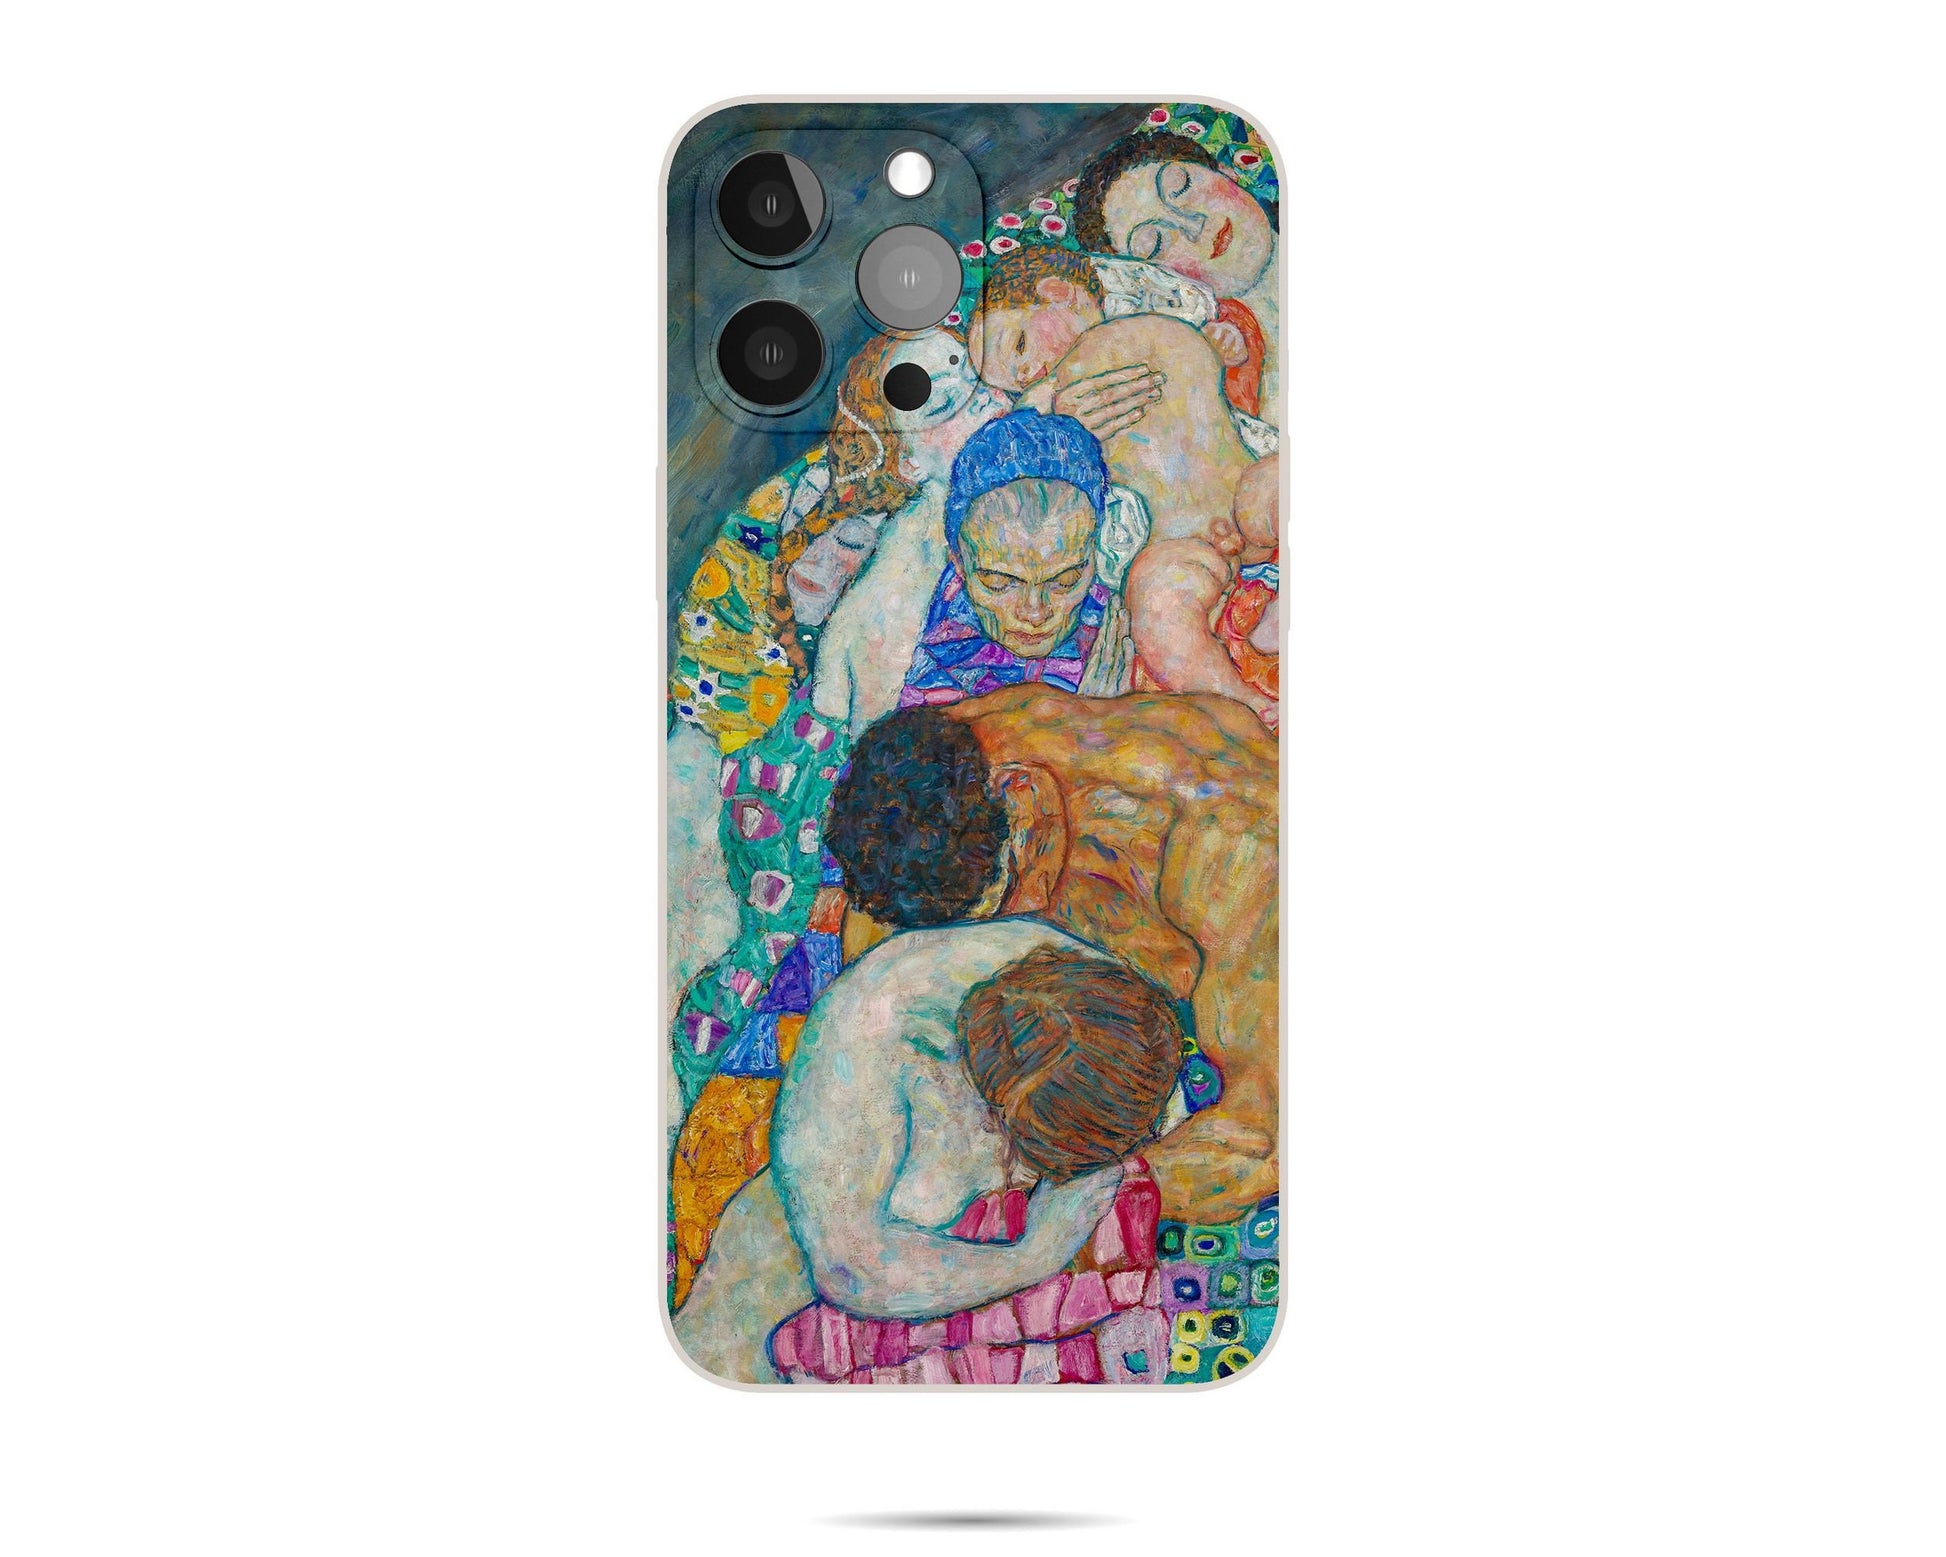 Iphone 14 Pro Max Case Of Gustav Klimt Painting Death And Life, Iphone 12 Mini Case, Aesthetic Iphone, Gift For Her, Iphone Case Silicone